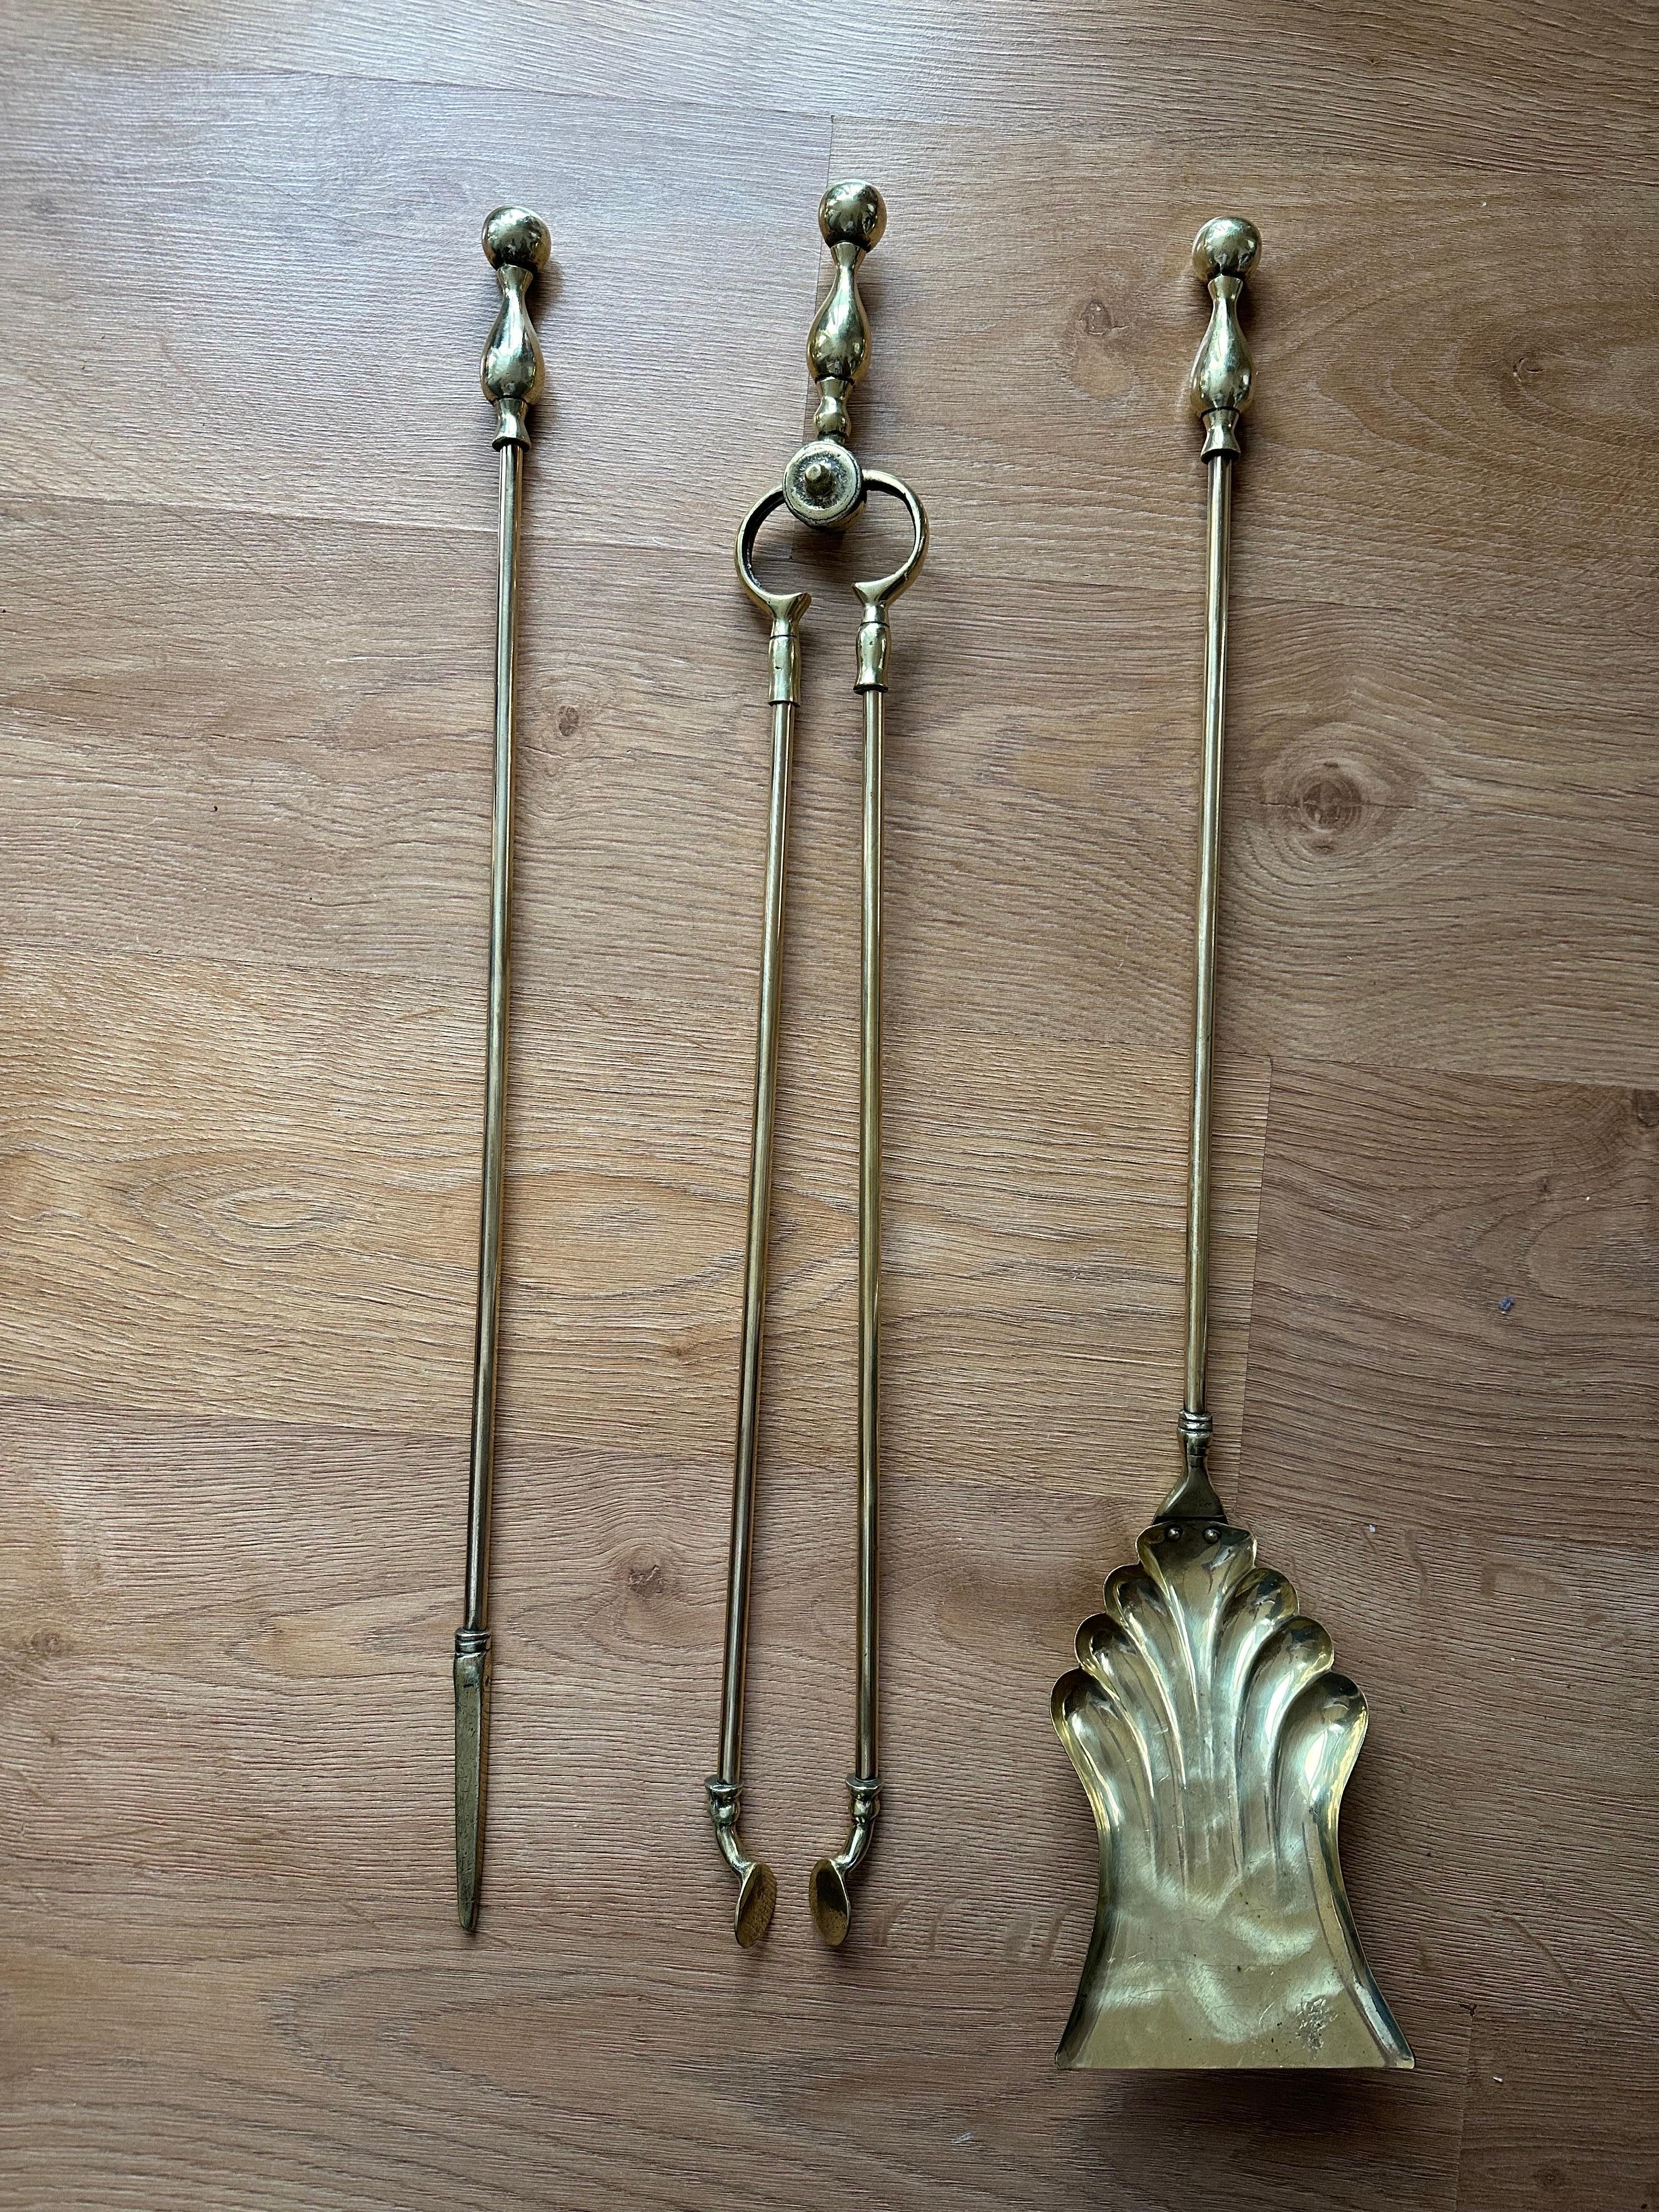 A stunning 19th century antique Victorian brass fire companion set with firedogs. The superb set is solid brass, with beautiful ball motif. with matching the elegant yet powerful impression the set provides. This is truly a remarkable set, with